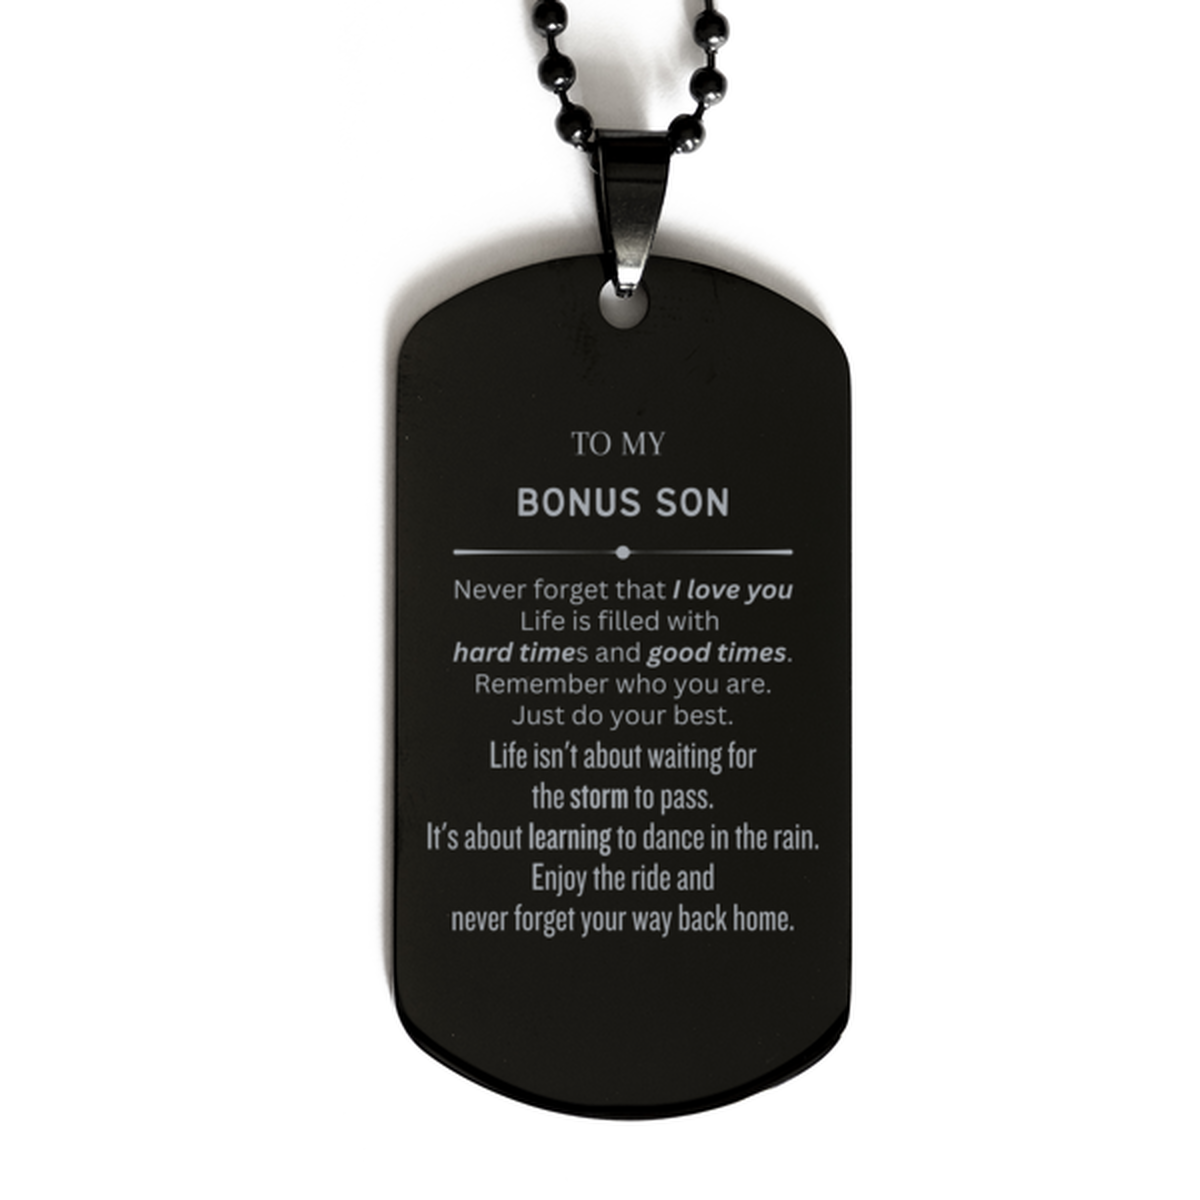 Christmas Bonus Son Black Dog Tag Gifts, To My Bonus Son Birthday Thank You Gifts For Bonus Son, Graduation Unique Gifts For Bonus Son To My Bonus Son Never forget that I love you life is filled with hard times and good times. Remember who you are. Just d